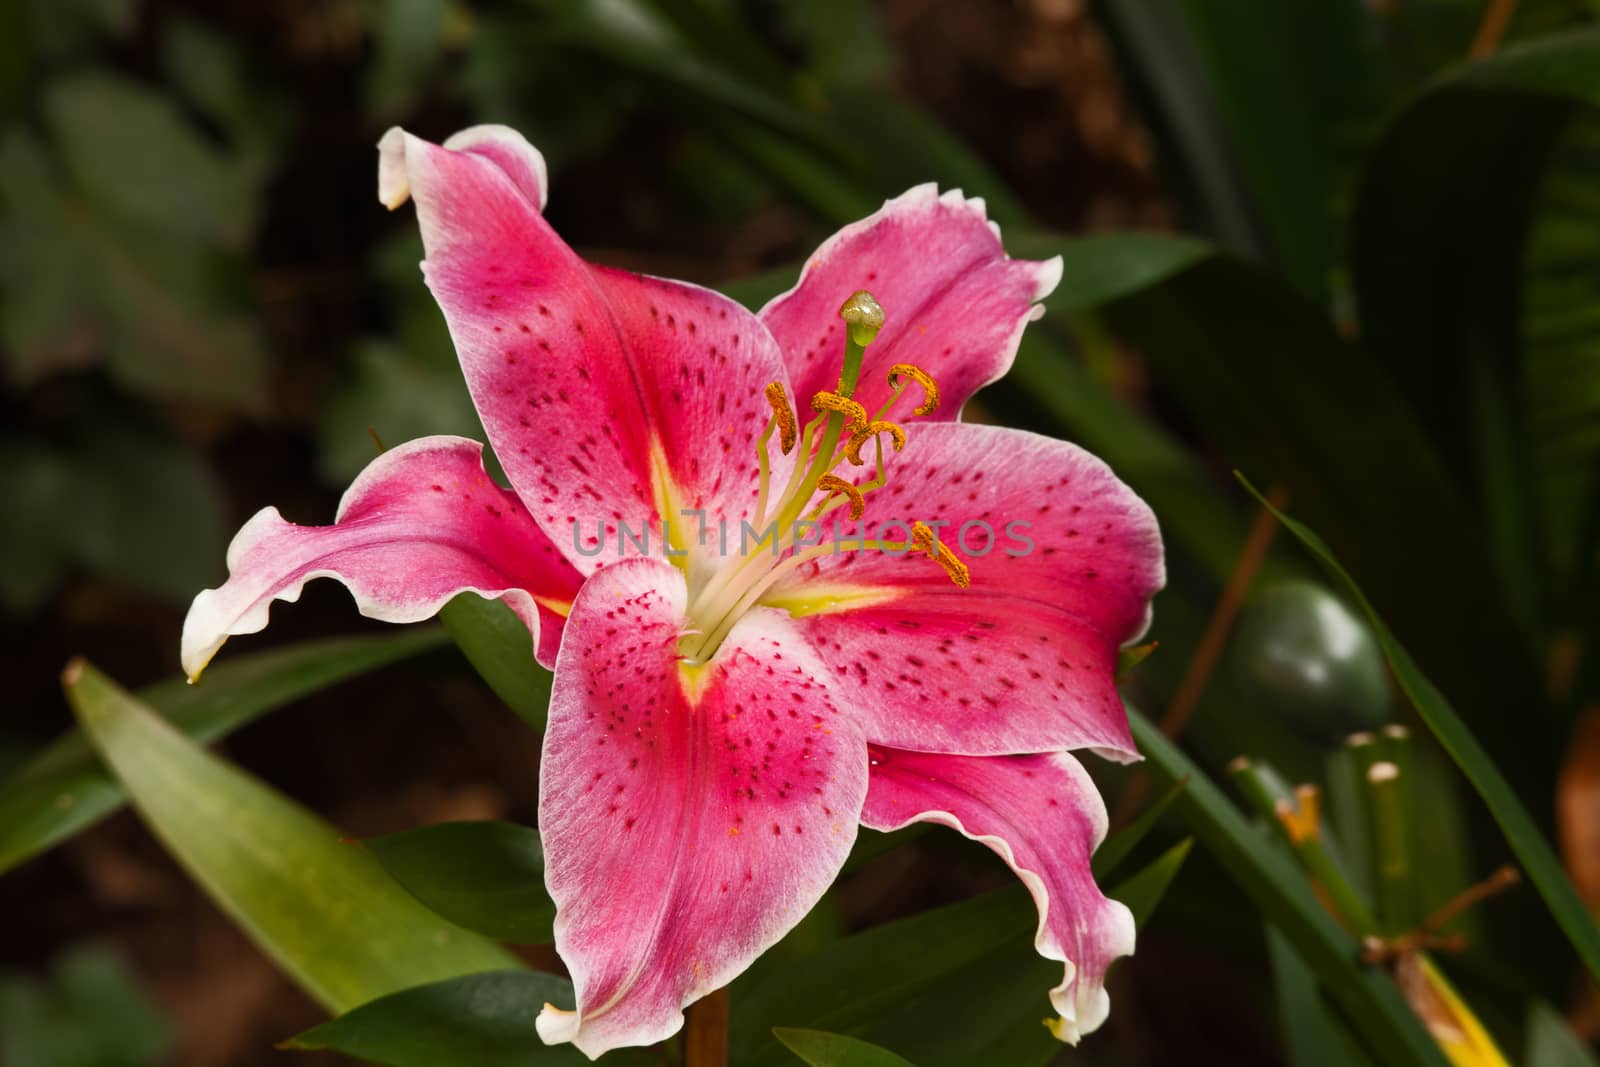 Pink Oriental Lily 1 by kobus_peche